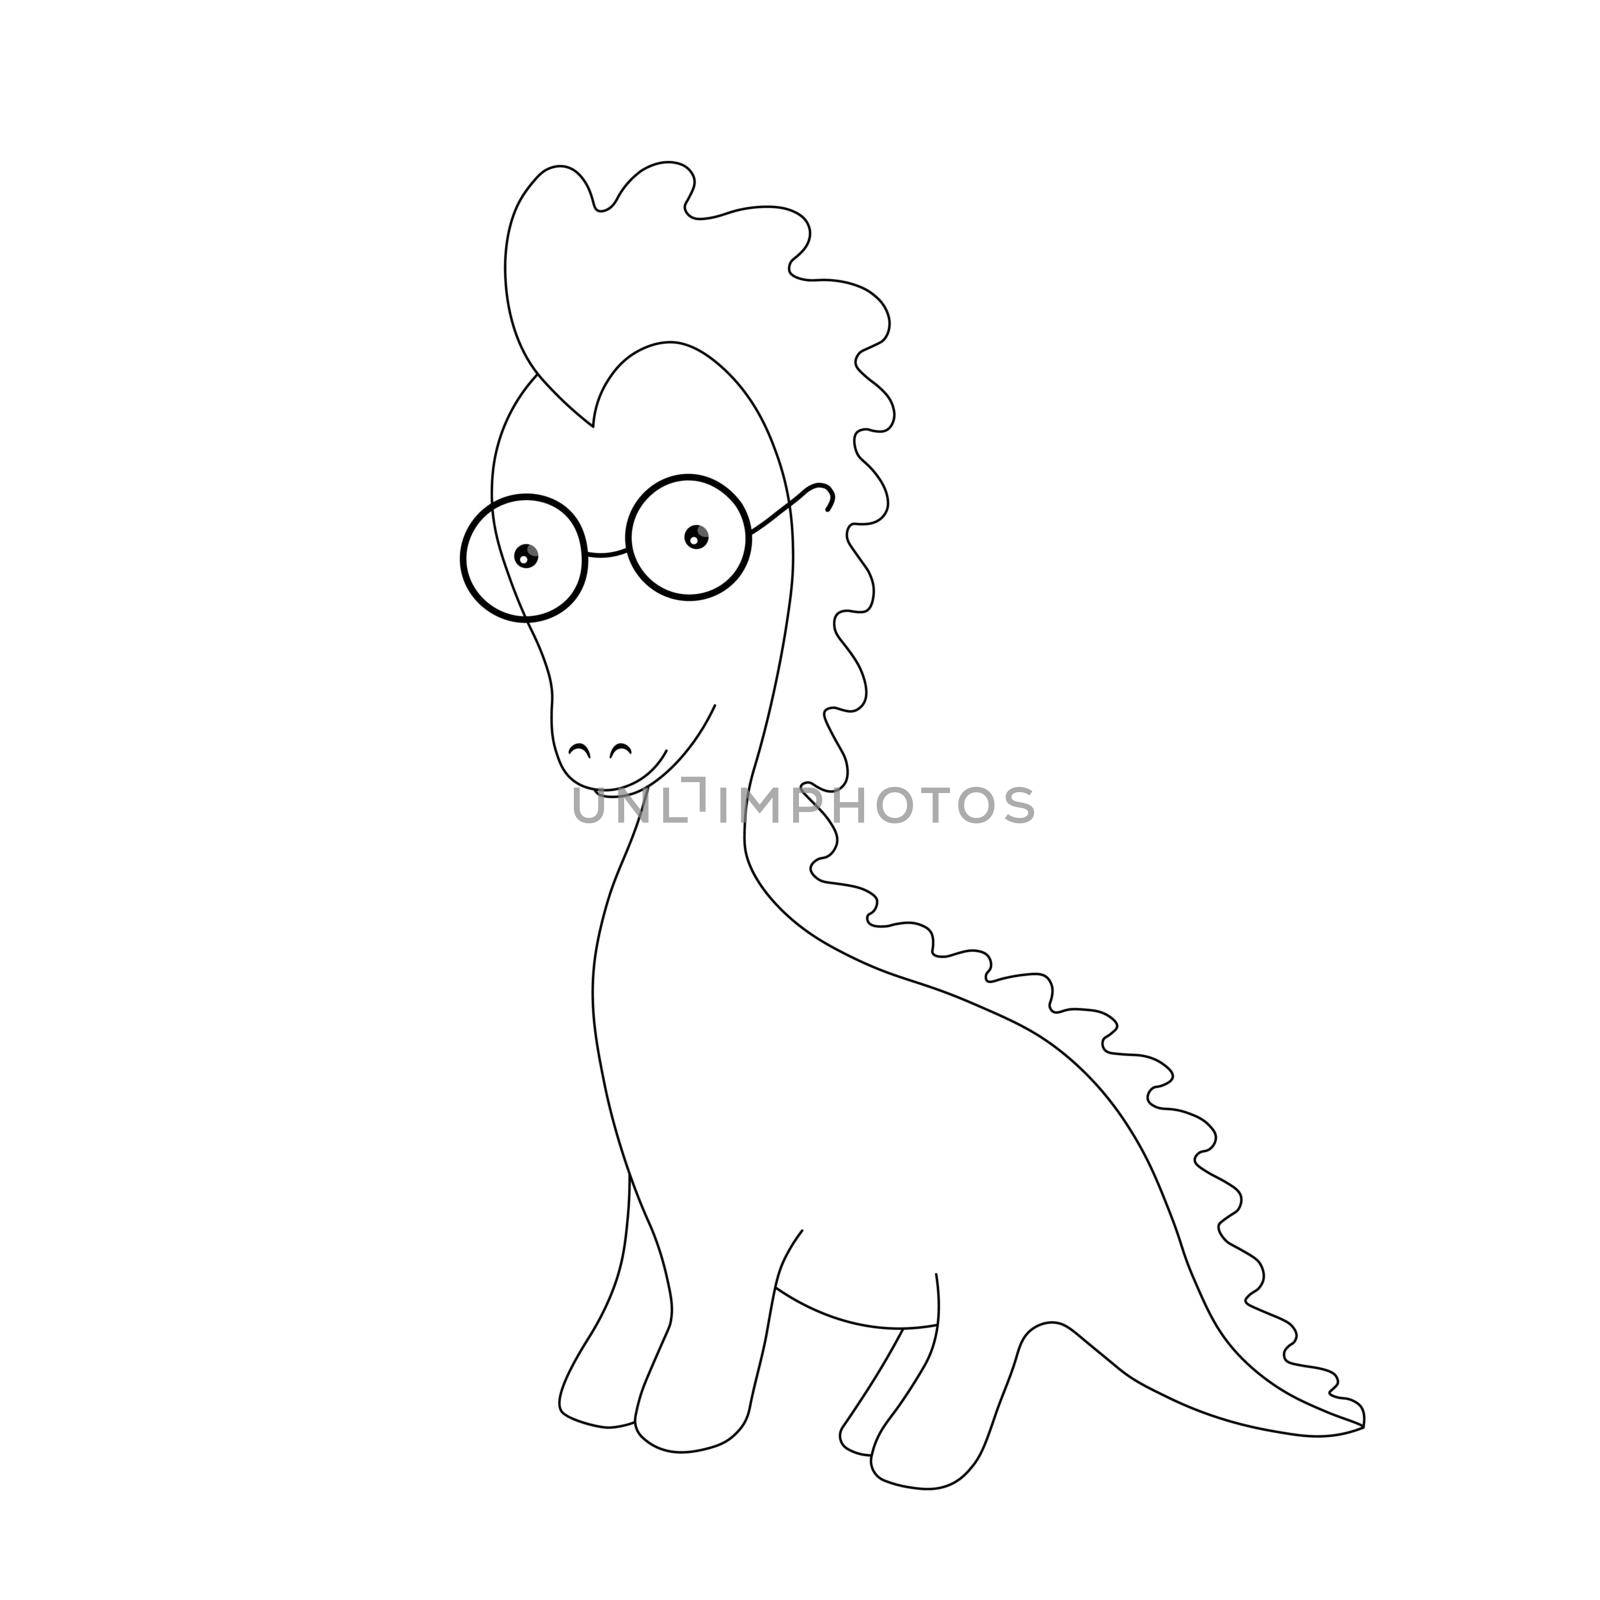 Coloring Pages. Colouring pictures with cute .dinosaur with glasses. by allaku